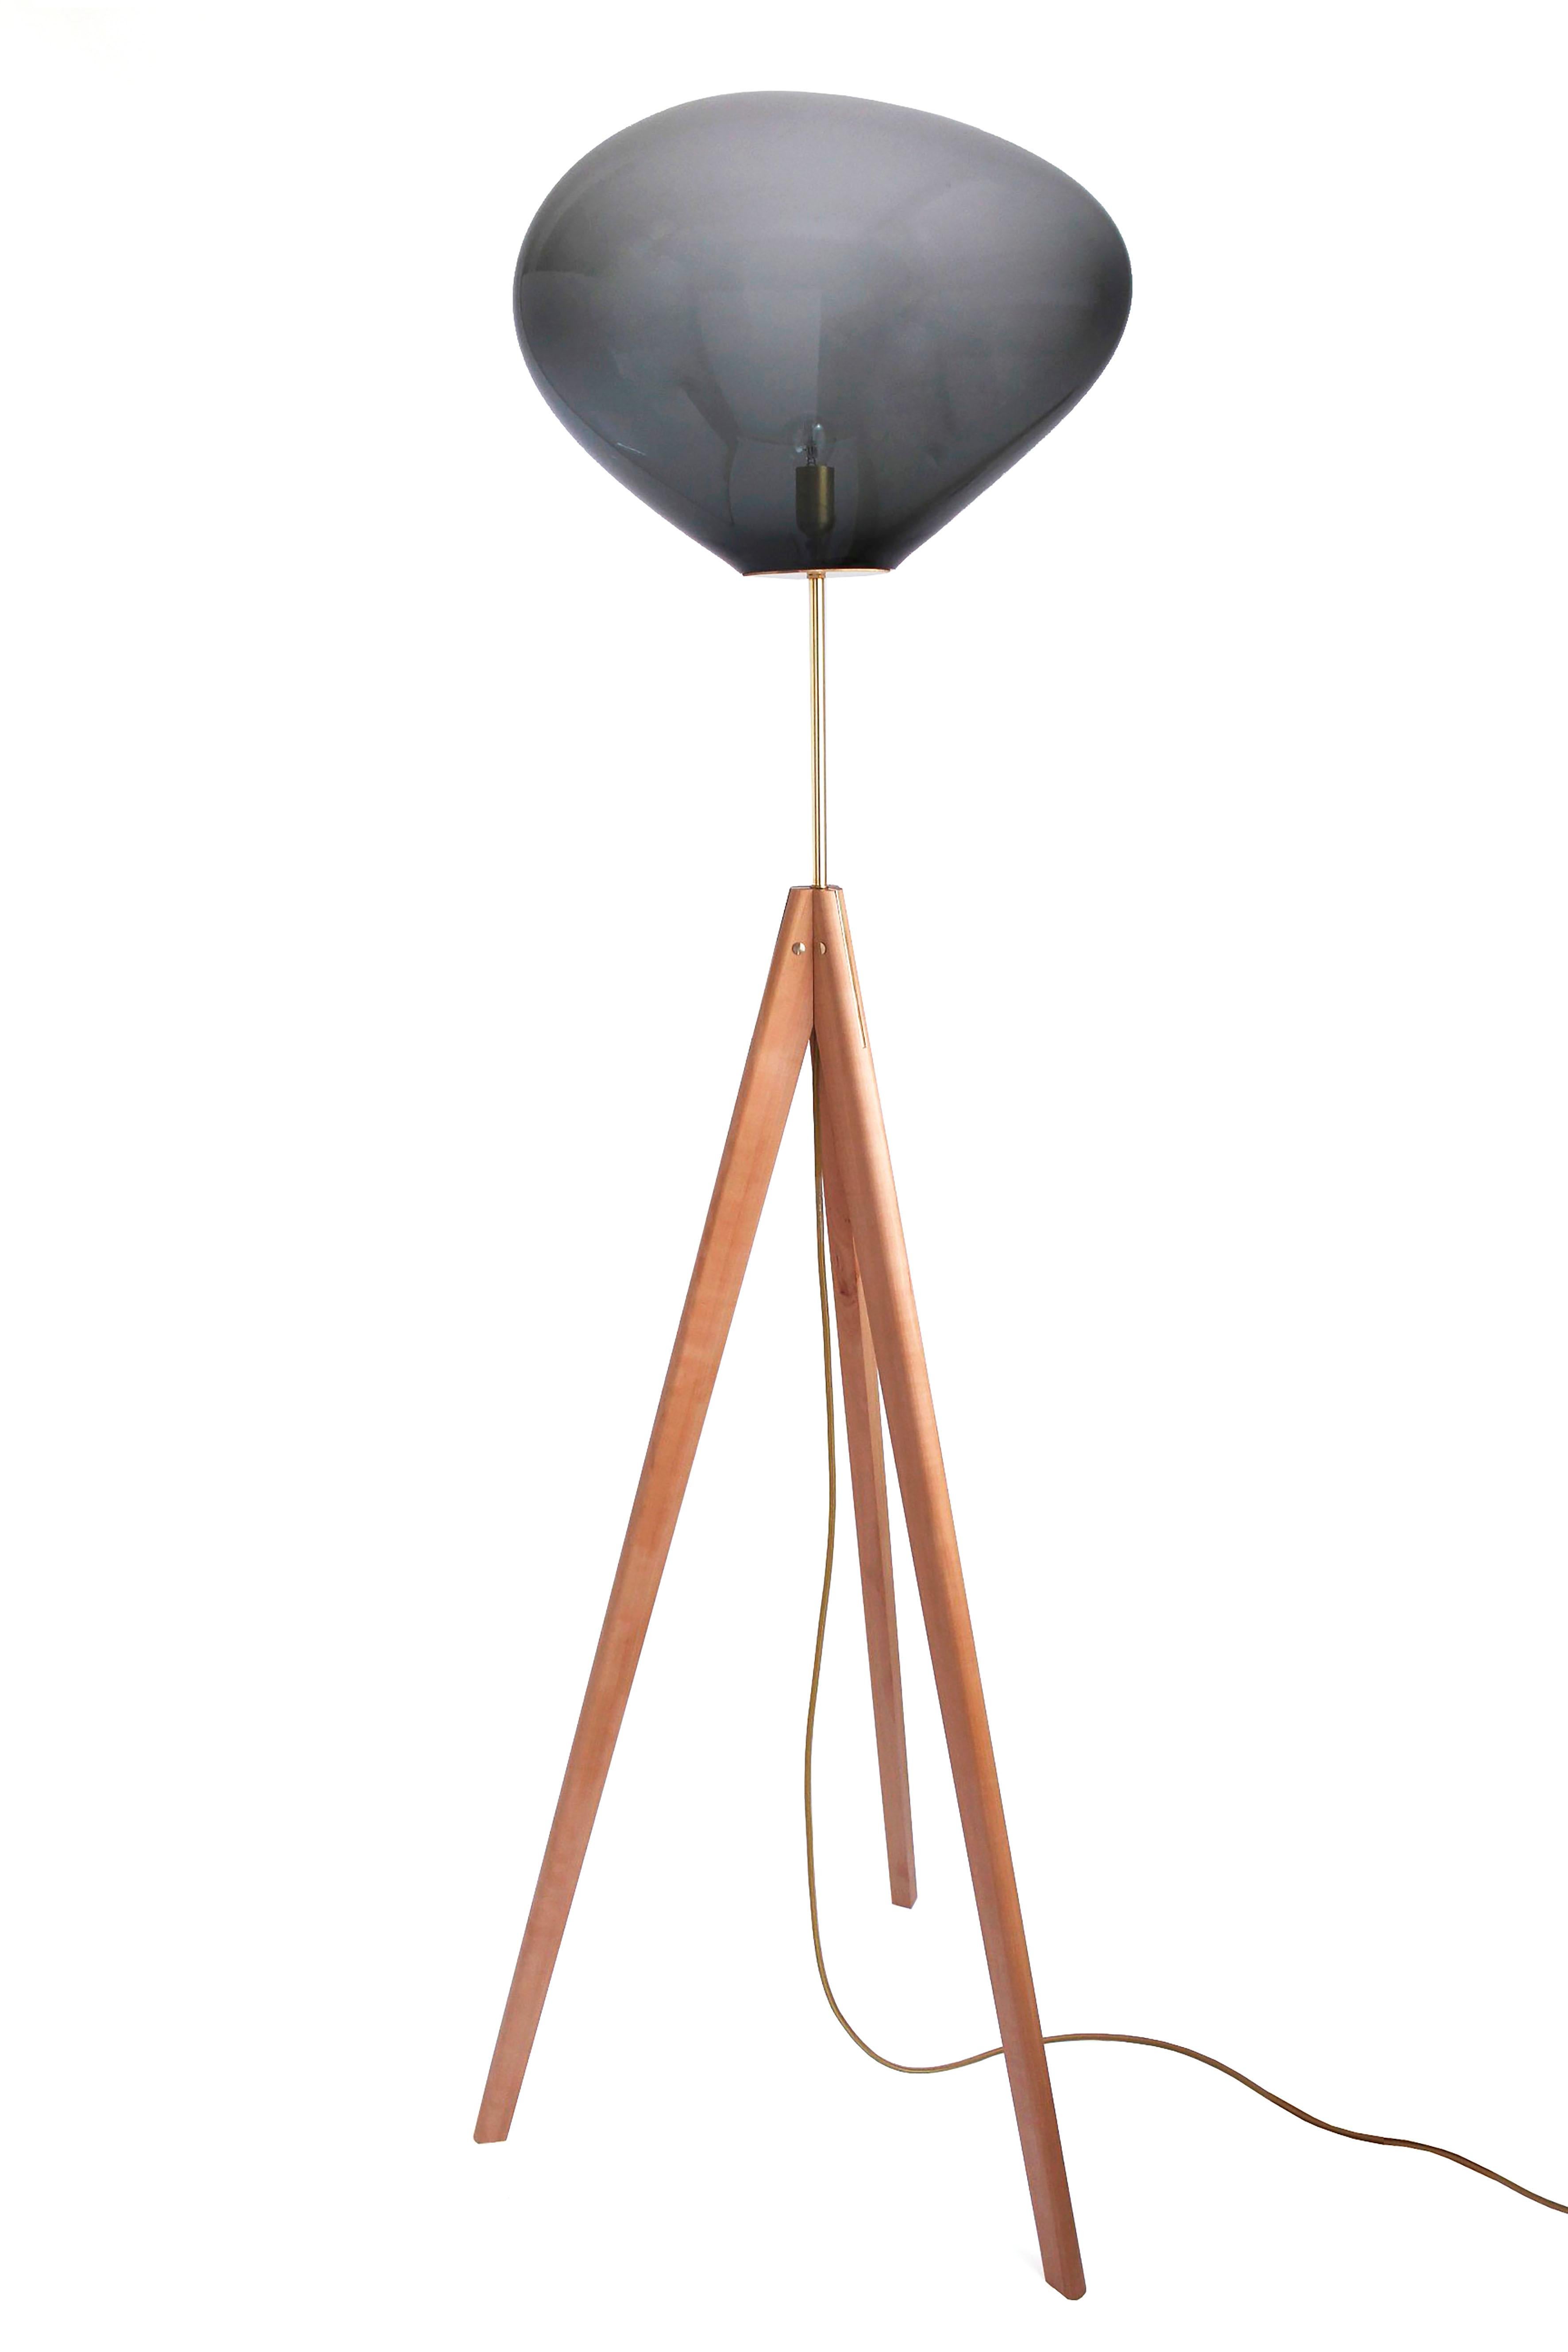 German Set of 2 Stati x Amber Iridescent Floor Lamps by Eloa For Sale